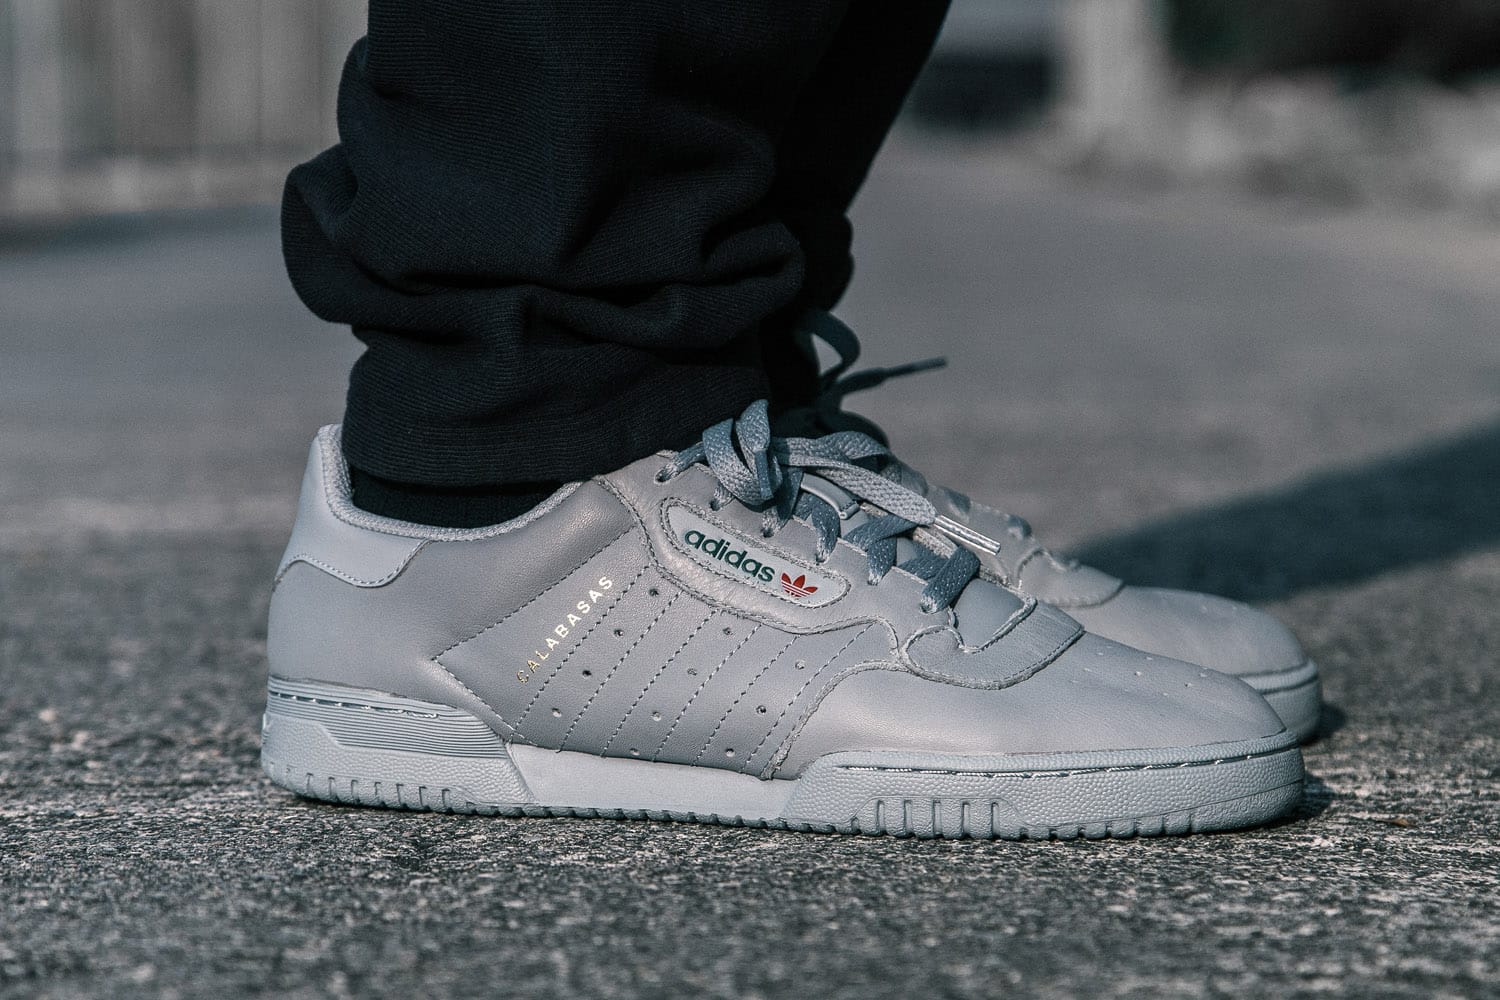 yeezy powerphase outfit